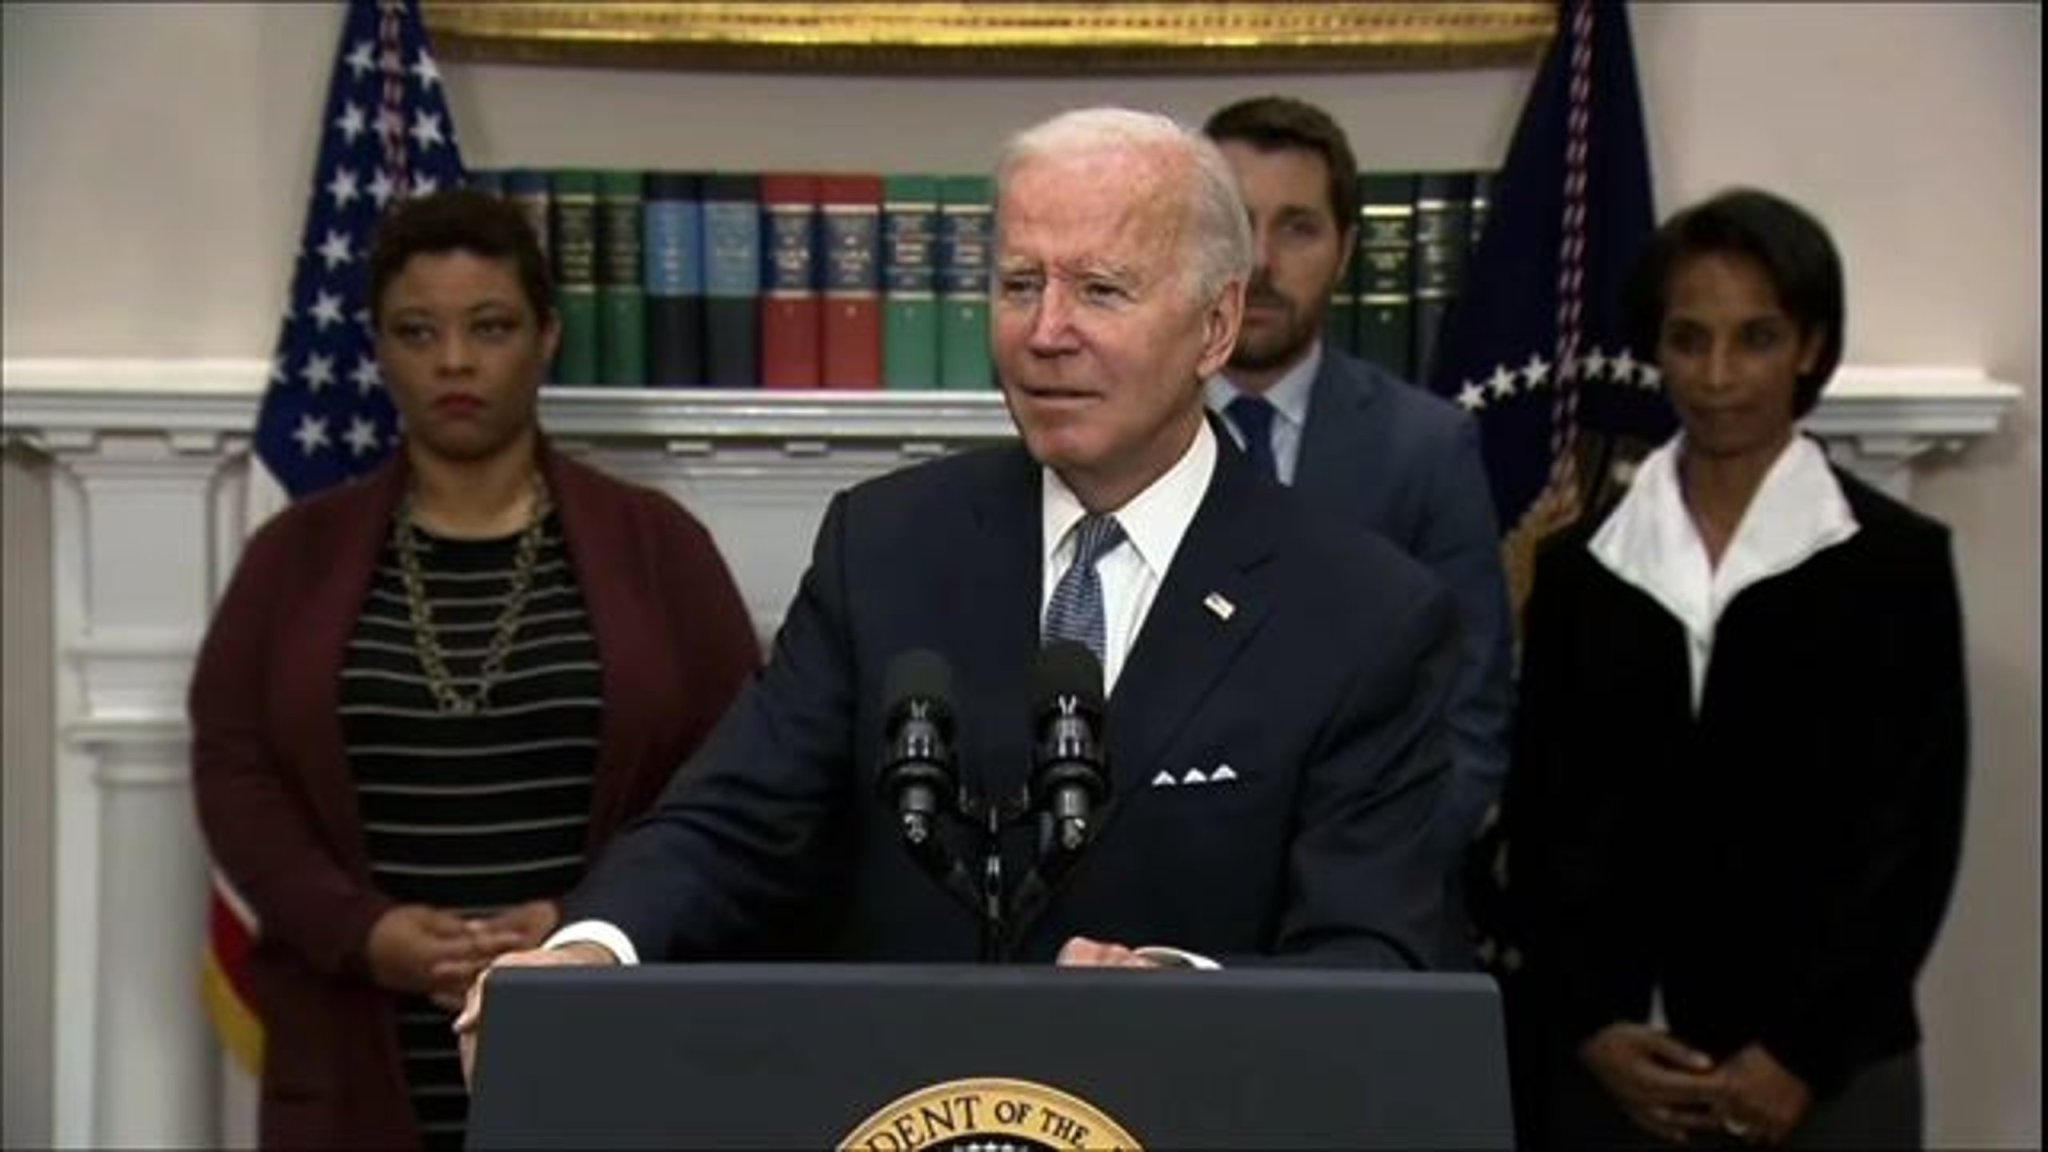 President Biden says he "does not understand" Republicans' threat to cut off funding for Ukraine if they win the House.